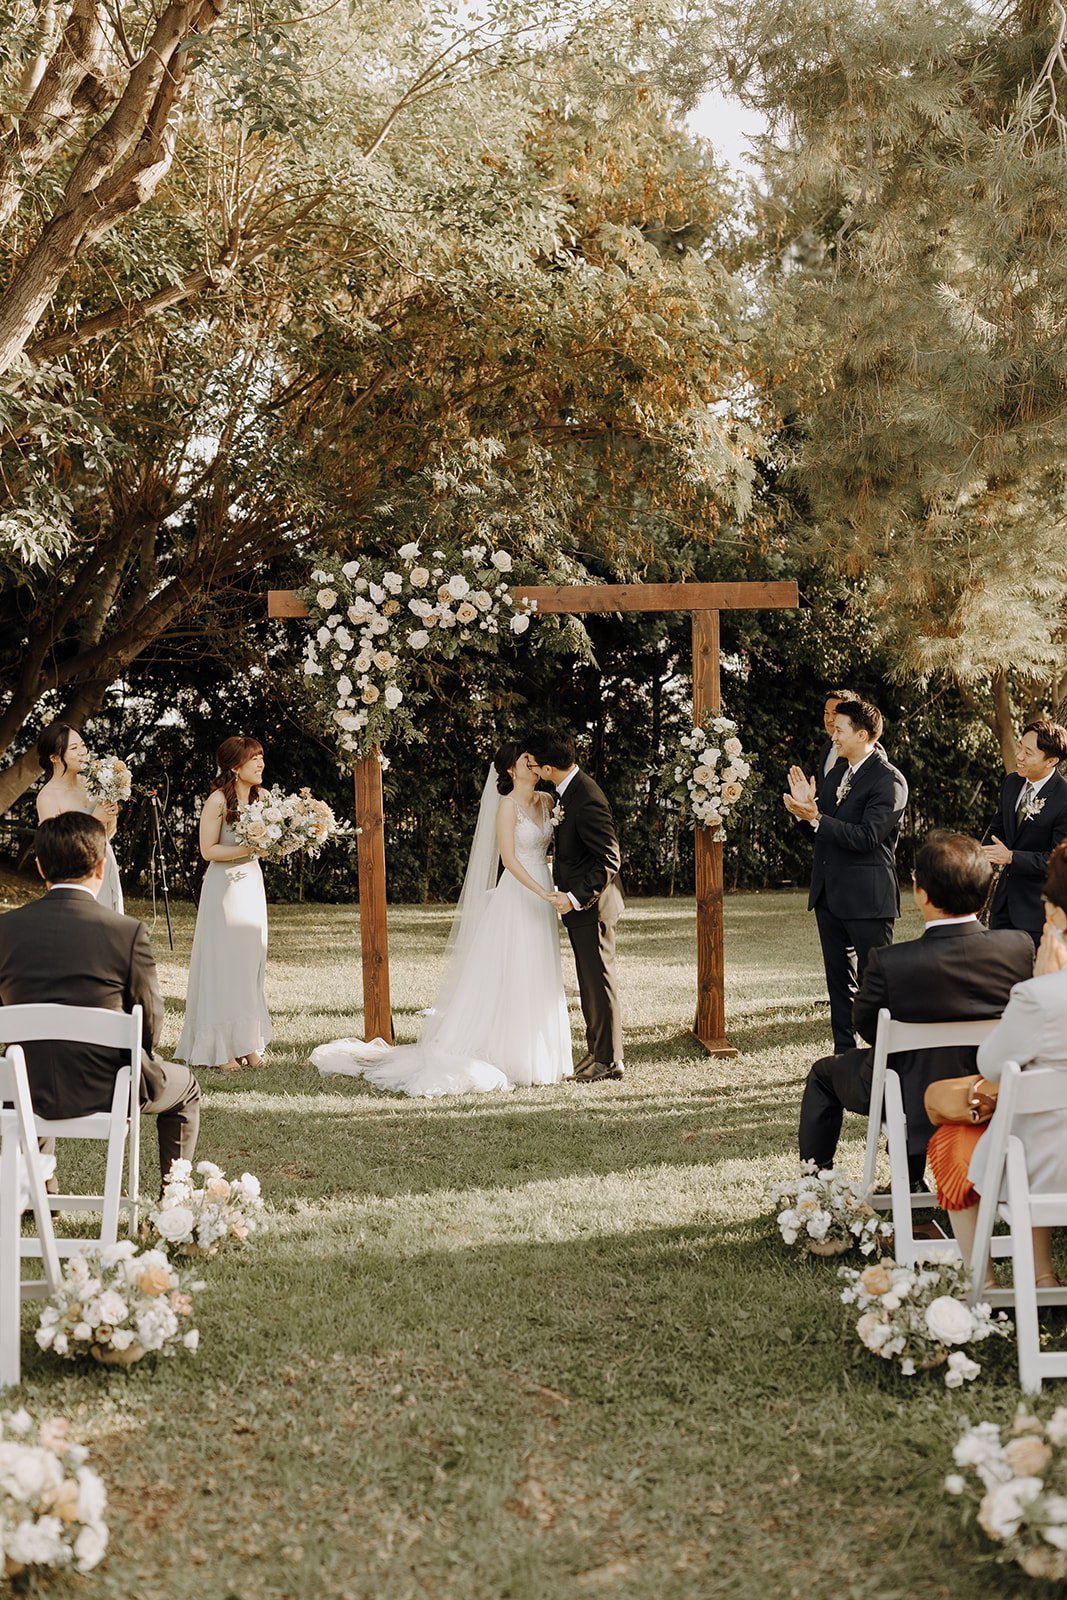 Bride and groom kiss at outdoor wedding altar